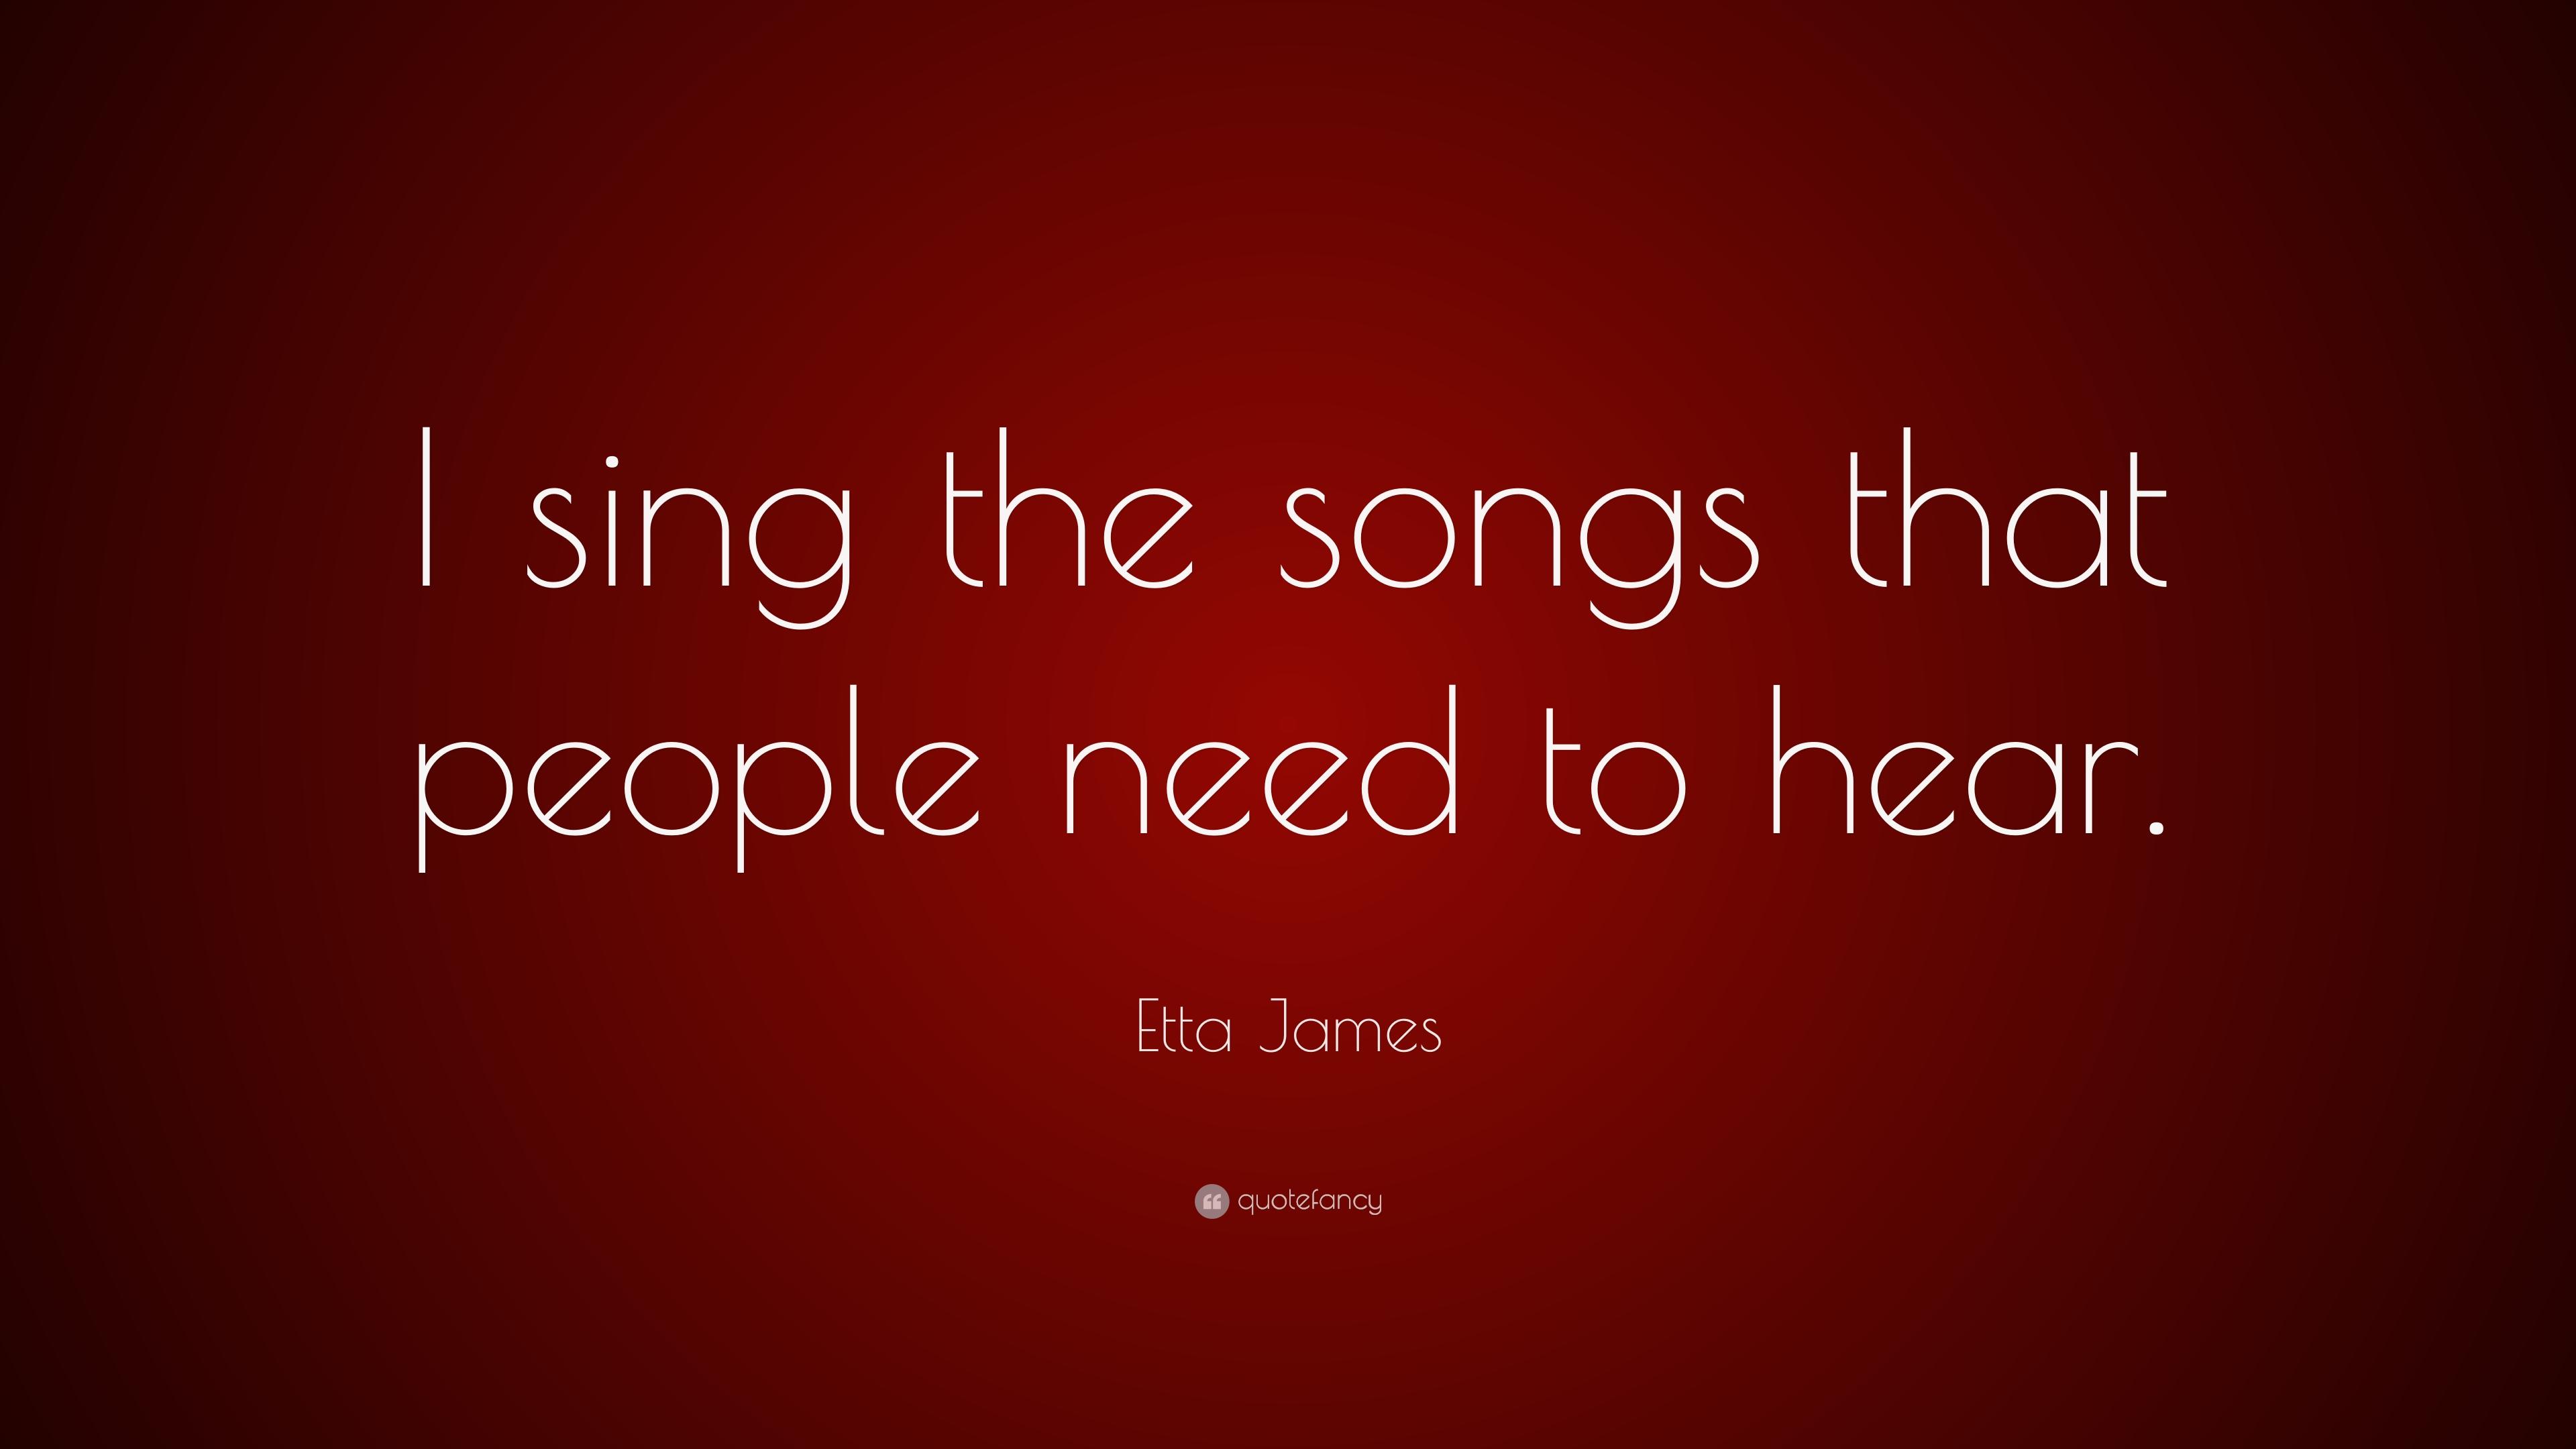 Etta James Quote: “I sing the songs that people need to hear.” 7